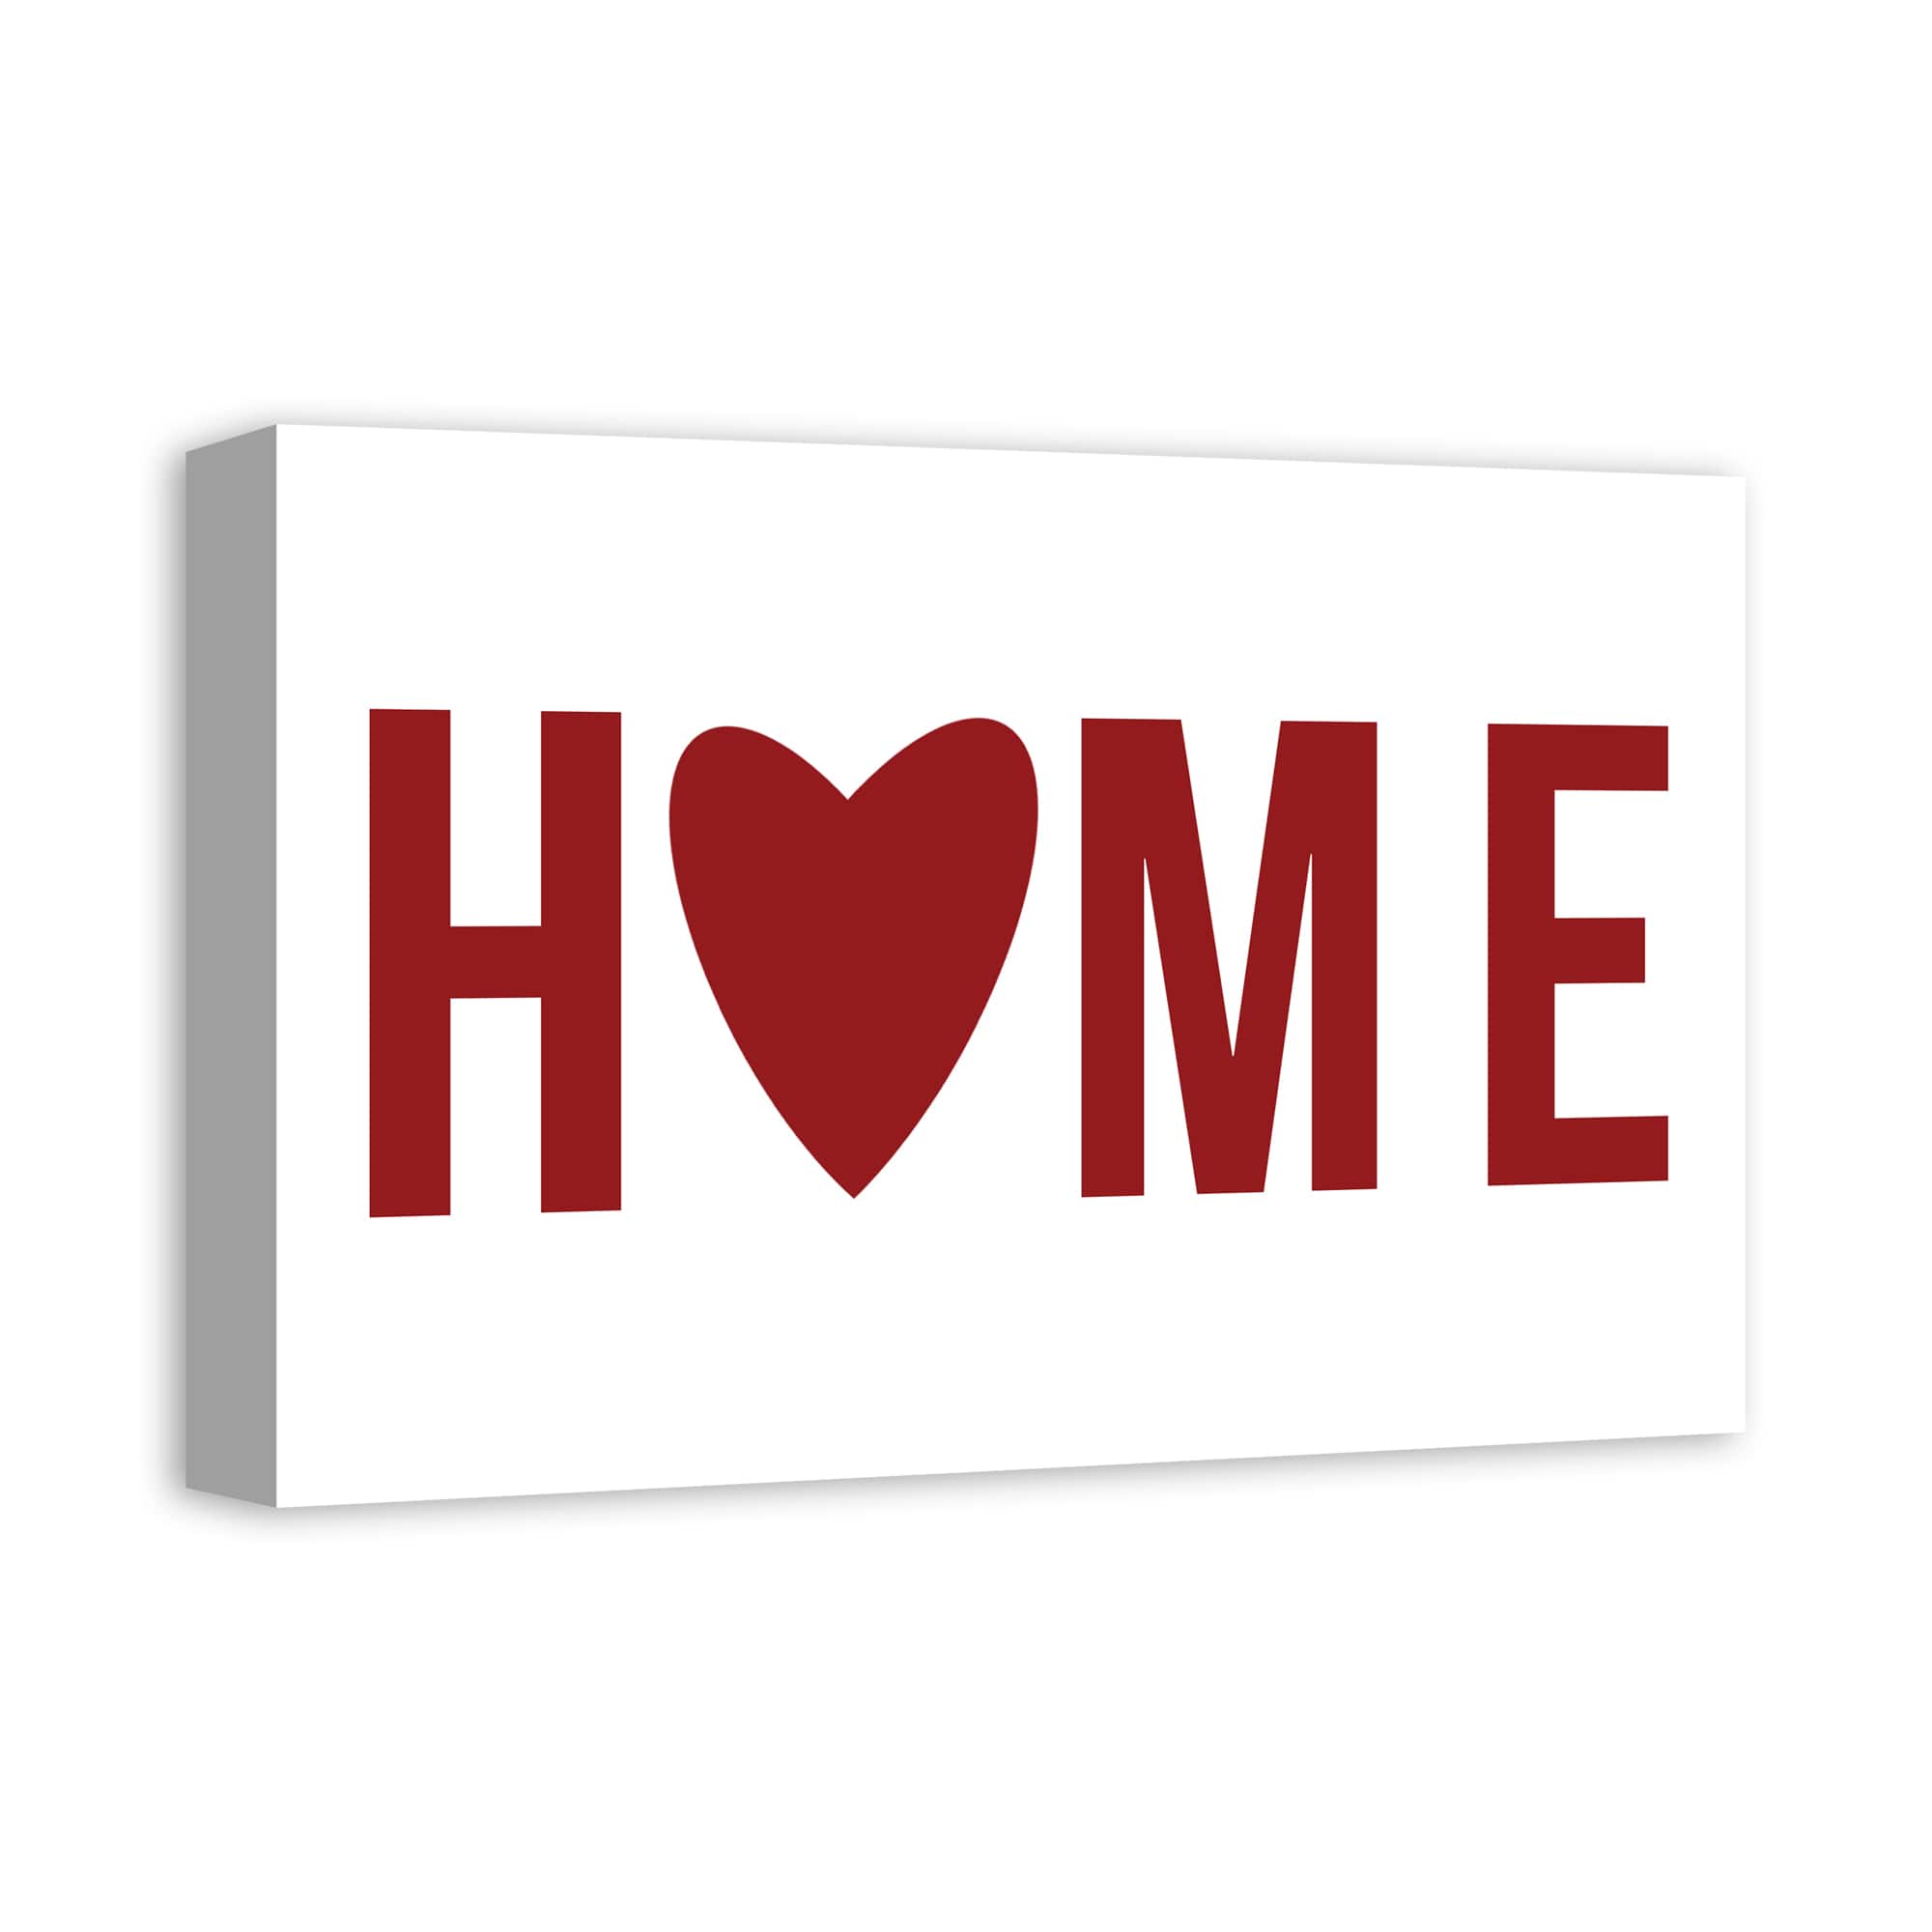 Home Heart Red Canvas Art